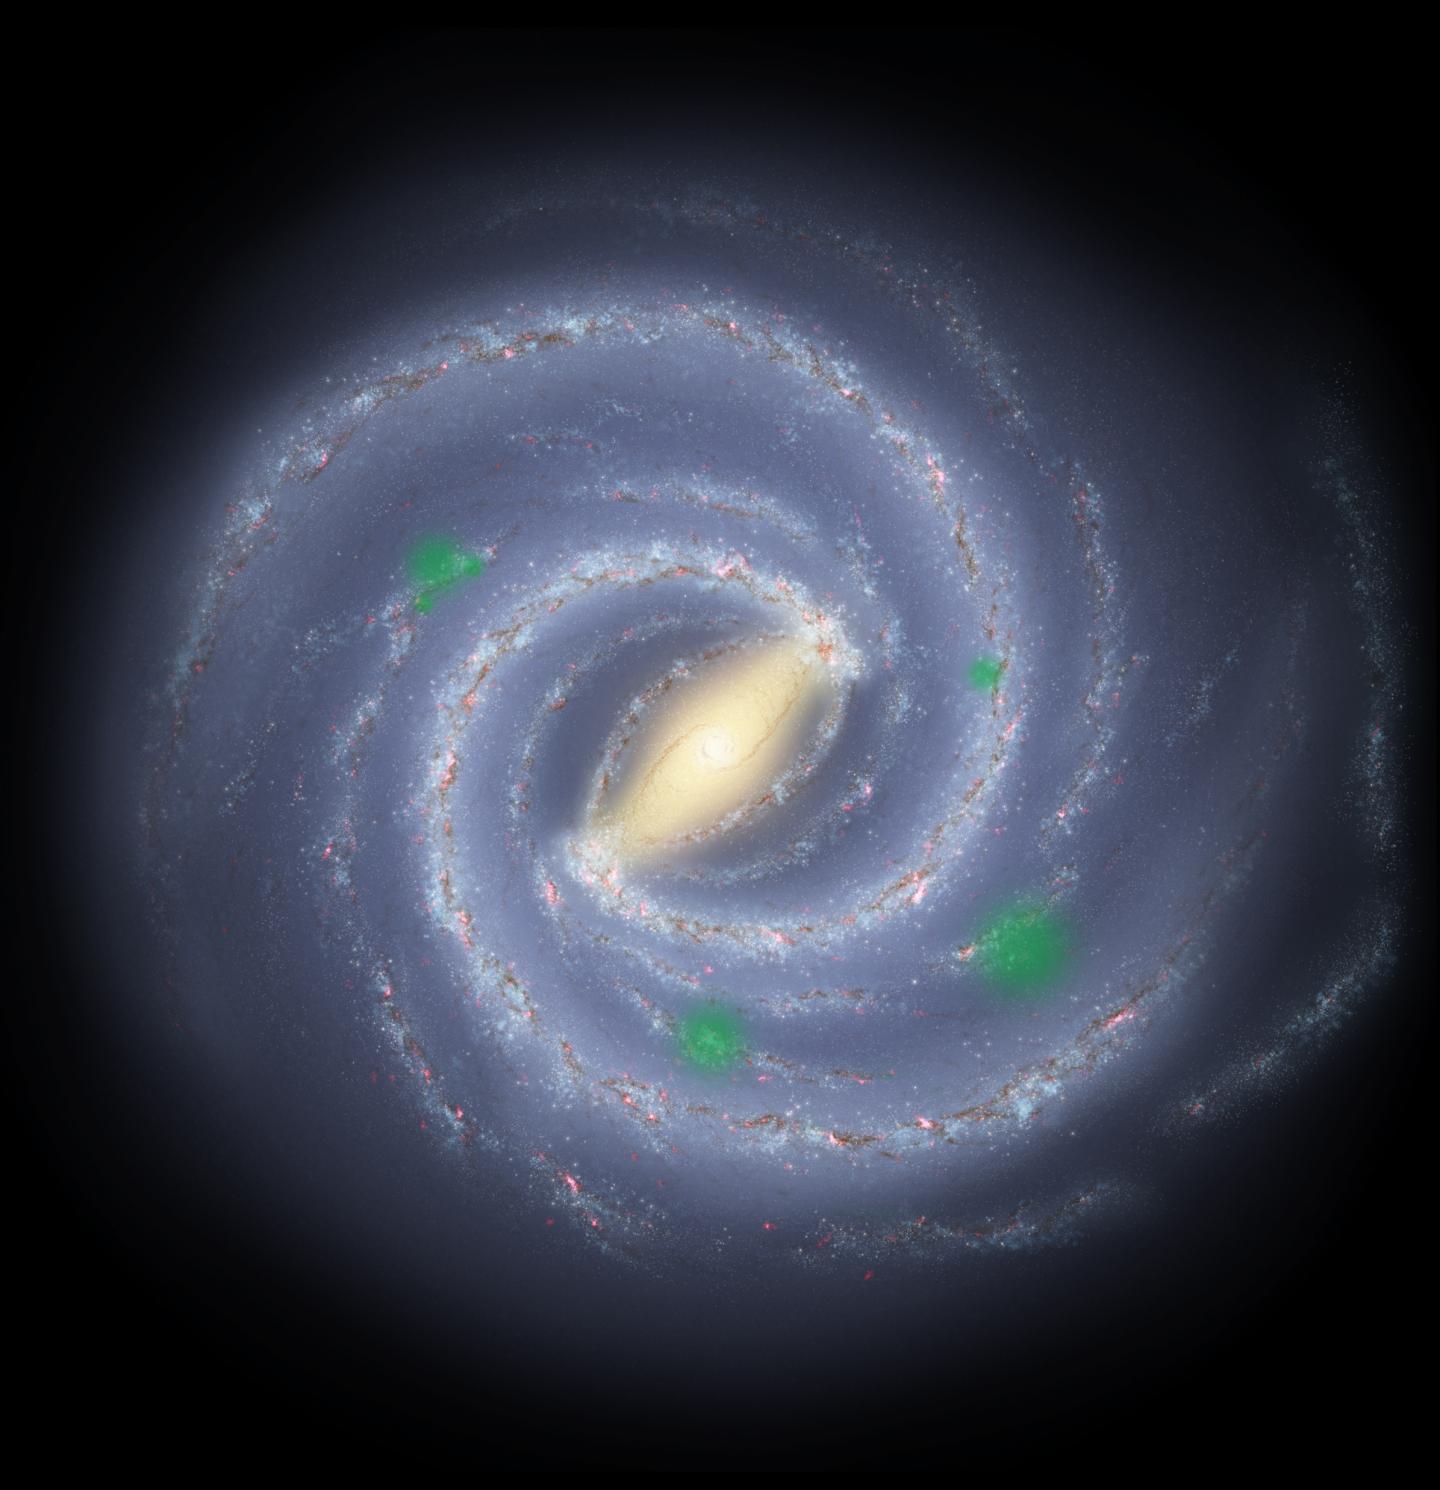 Artist's Conception of Milky Way with Bubbles of Life